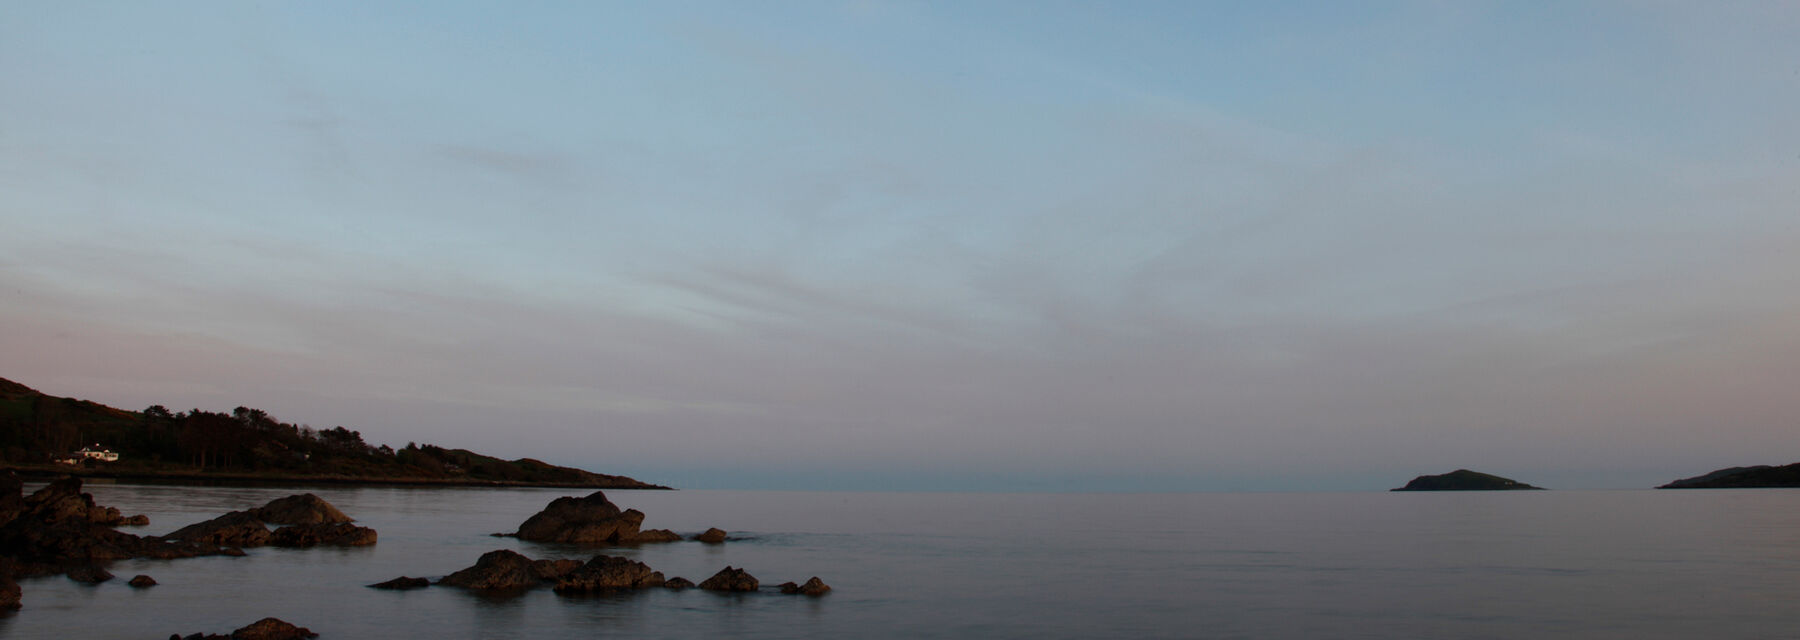 The sea at Rockcliffe seen at dusk, with the moon in the sky. Rocks run into the still, almost purple-blue water.